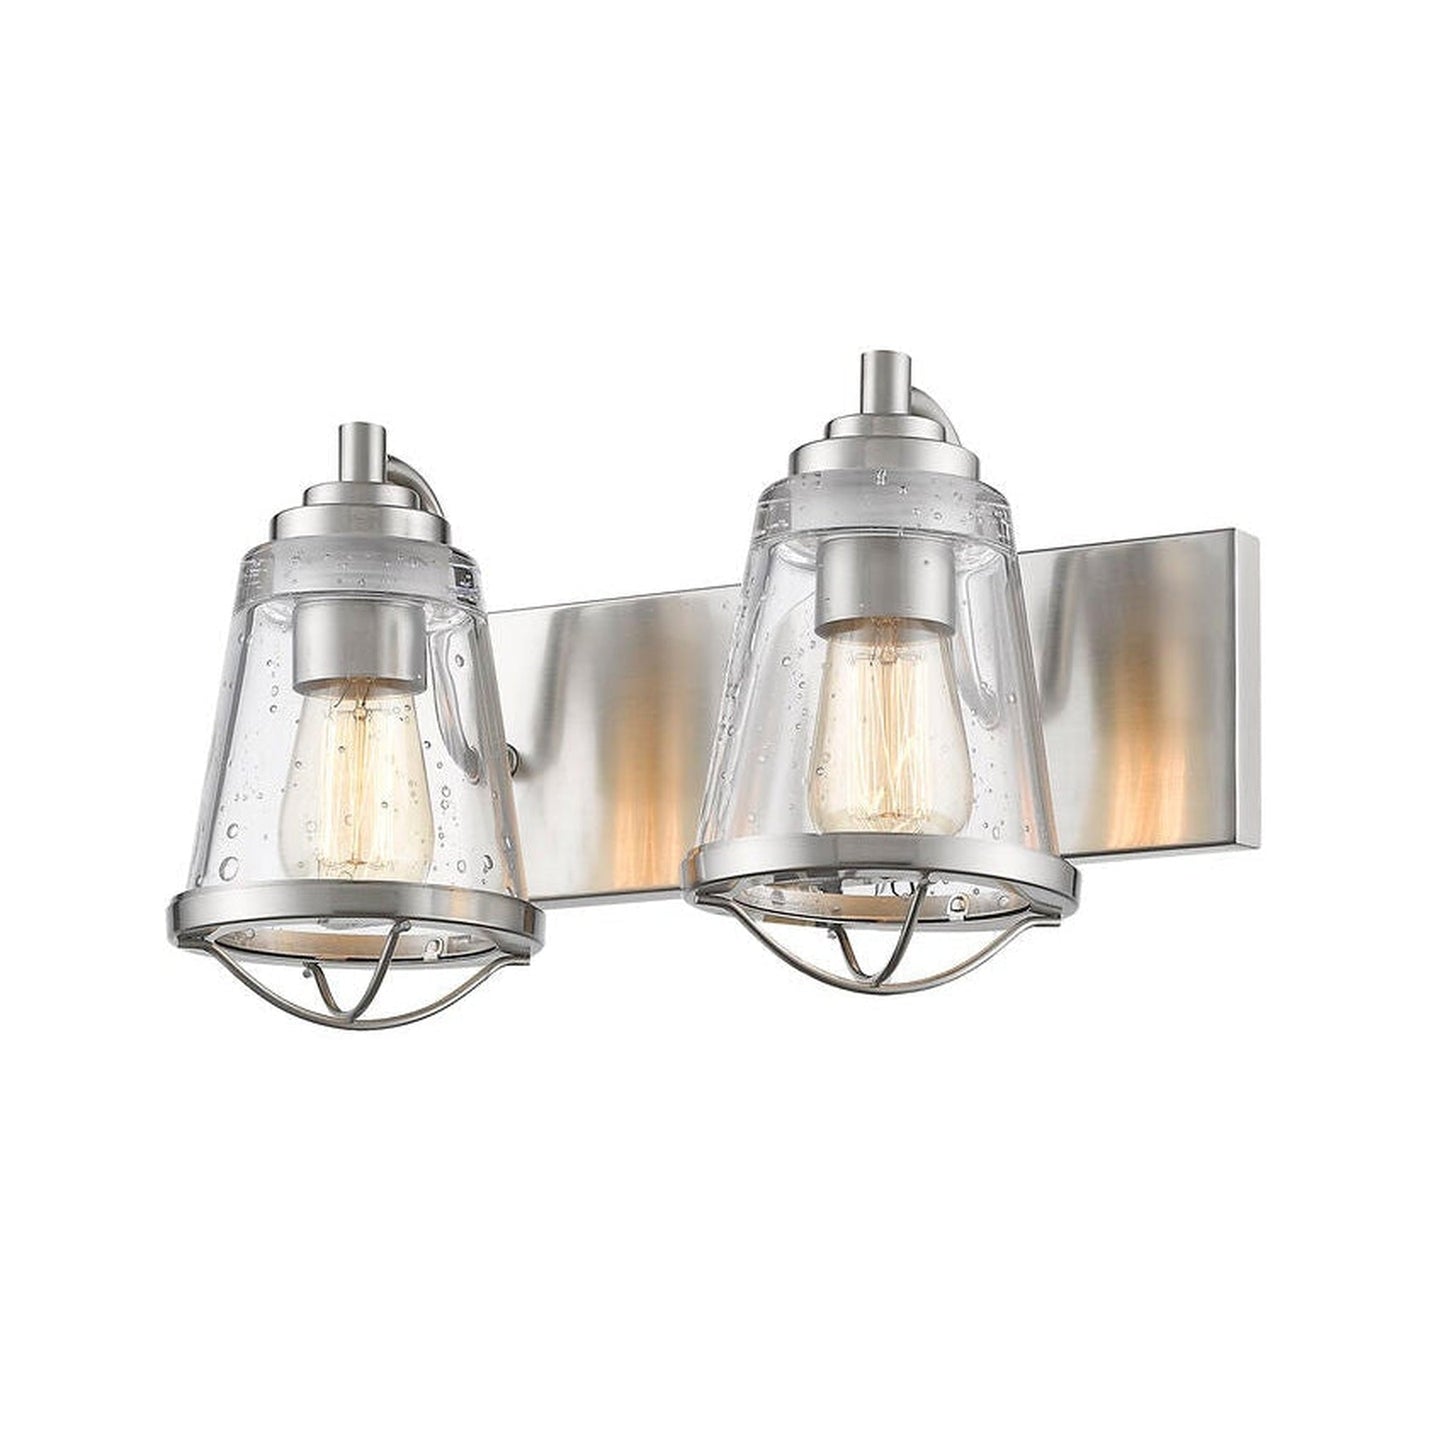 Z-Lite Mariner 16" 2-Light Brushed Nickel Vanity Light With Clear Seedy Glass Shade